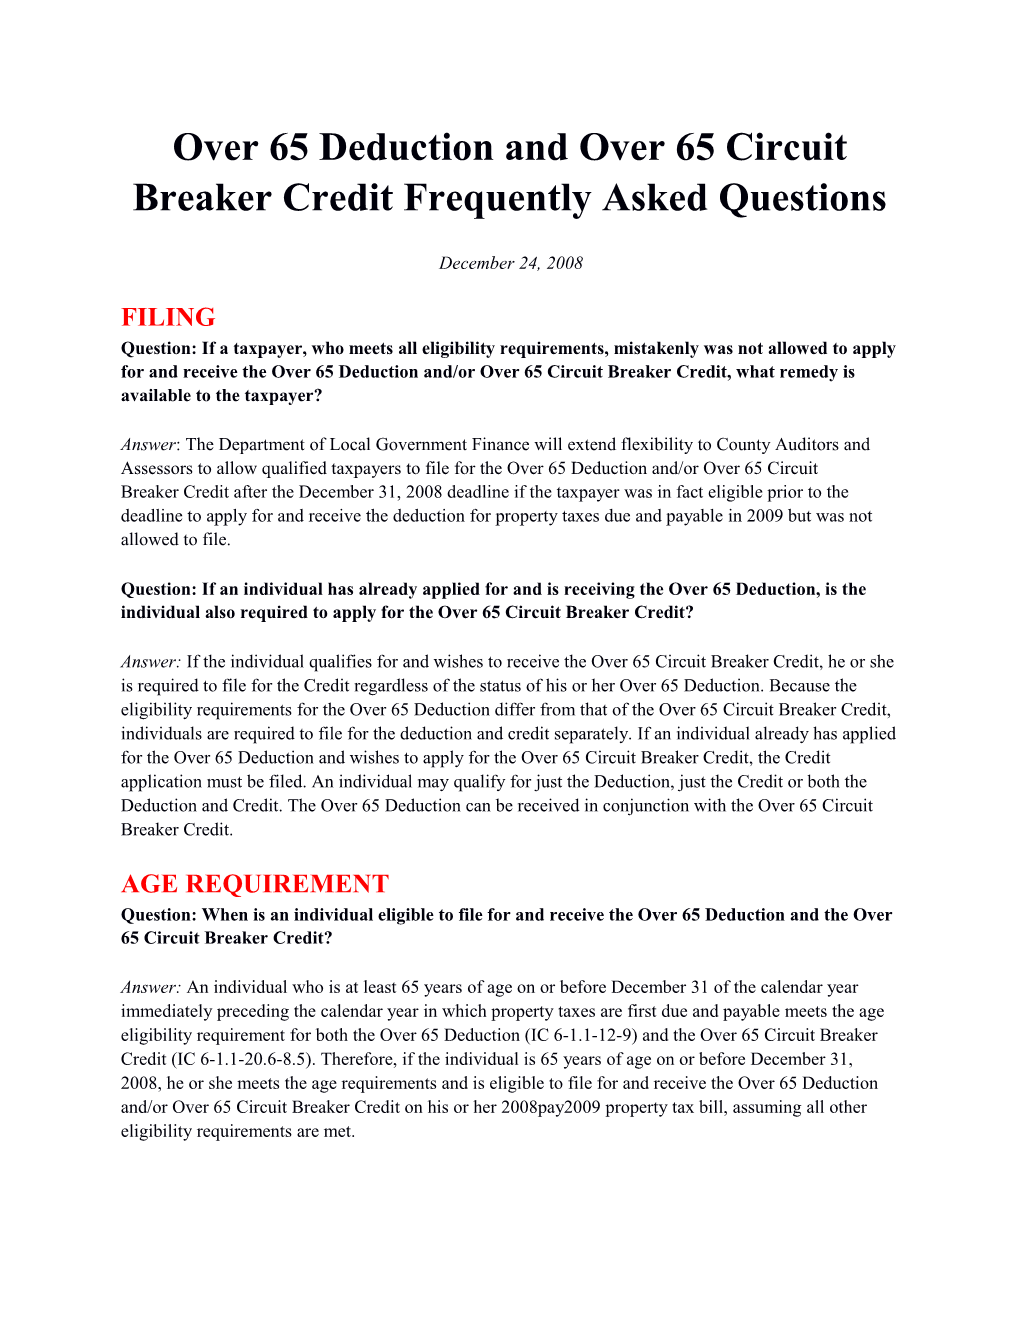 Over 65 Deduction and Over 65 Circuit Breaker Credit Frequently Asked Questions